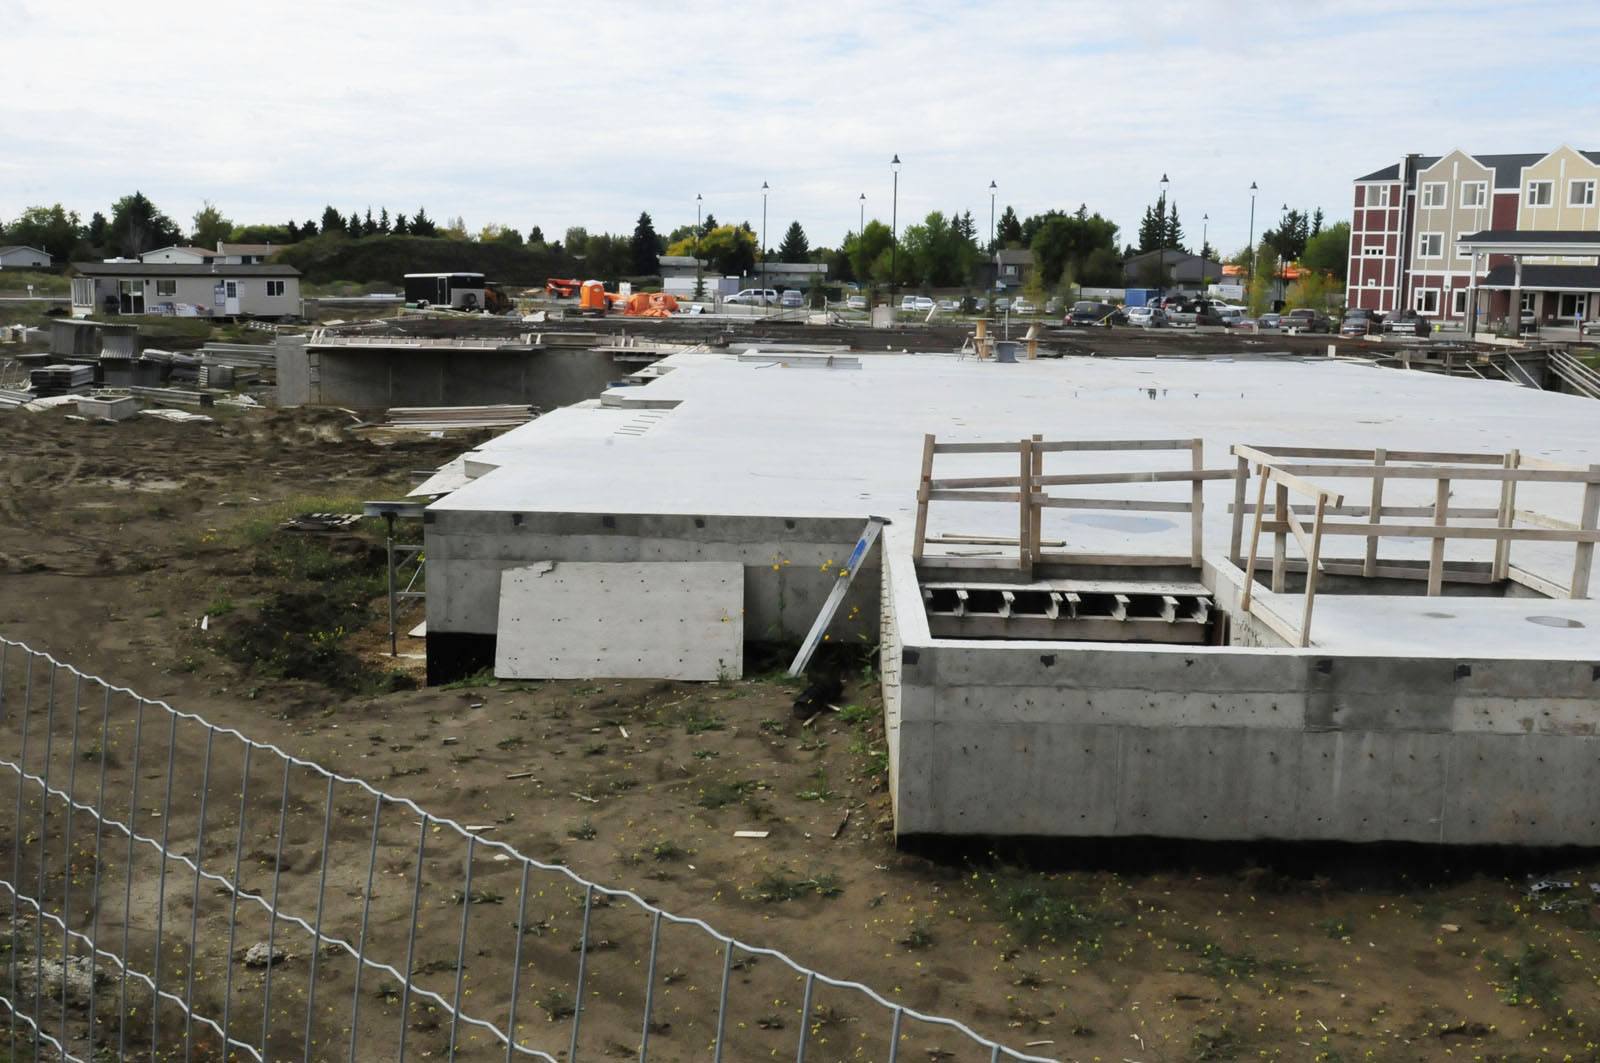 CONSTRUCTION- Work on the condominium complex located at 5301 Michener Ave. in Red Deer is set to resume.